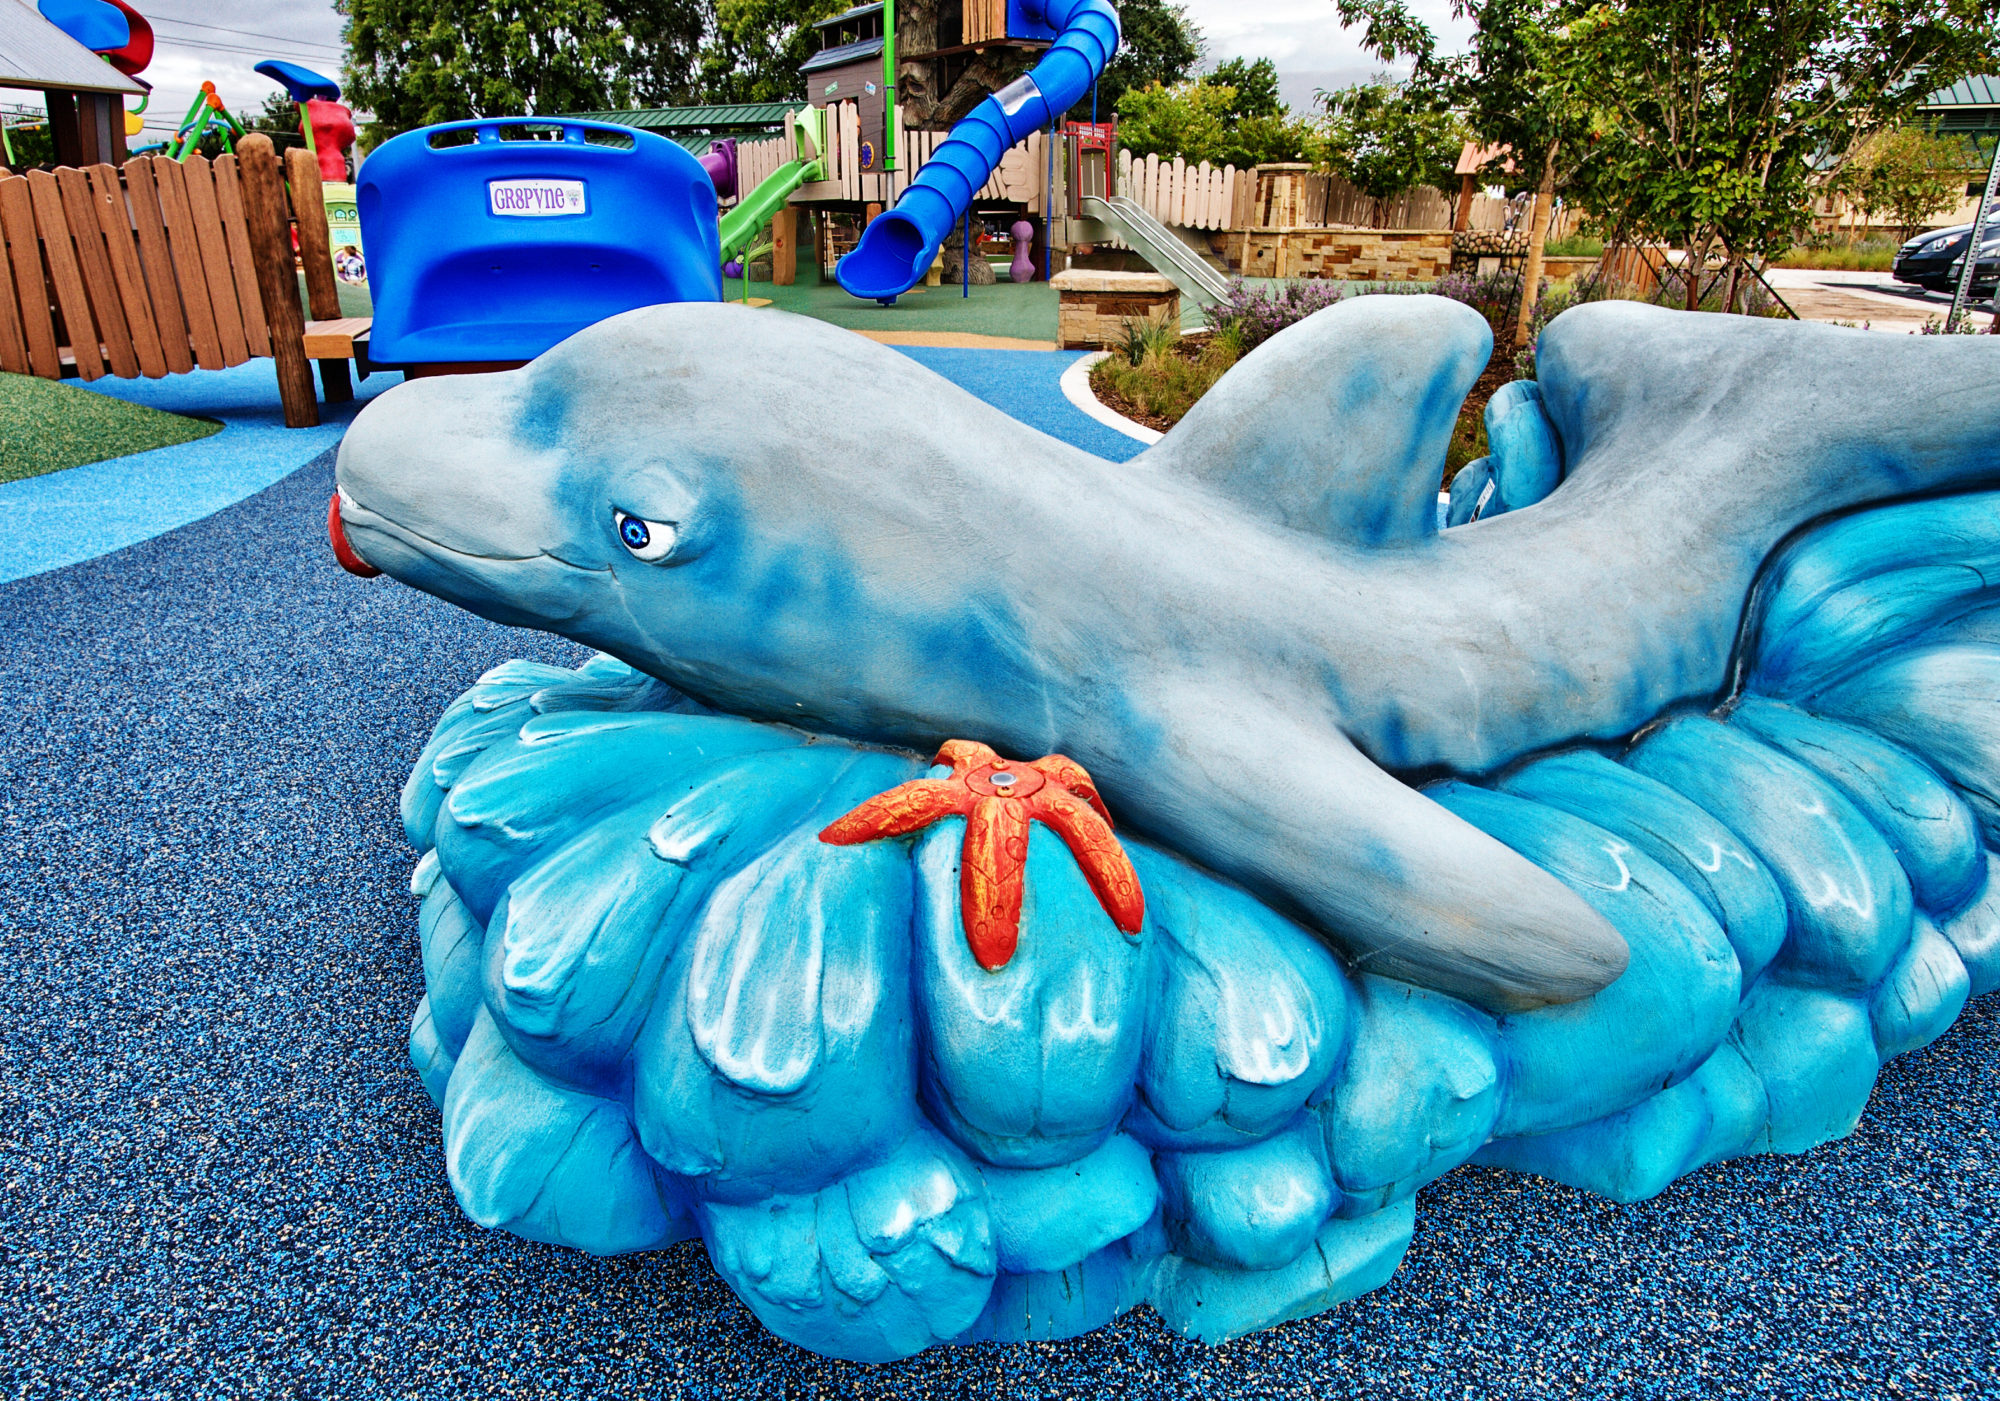 Dolphin sculpture at sea themed playground